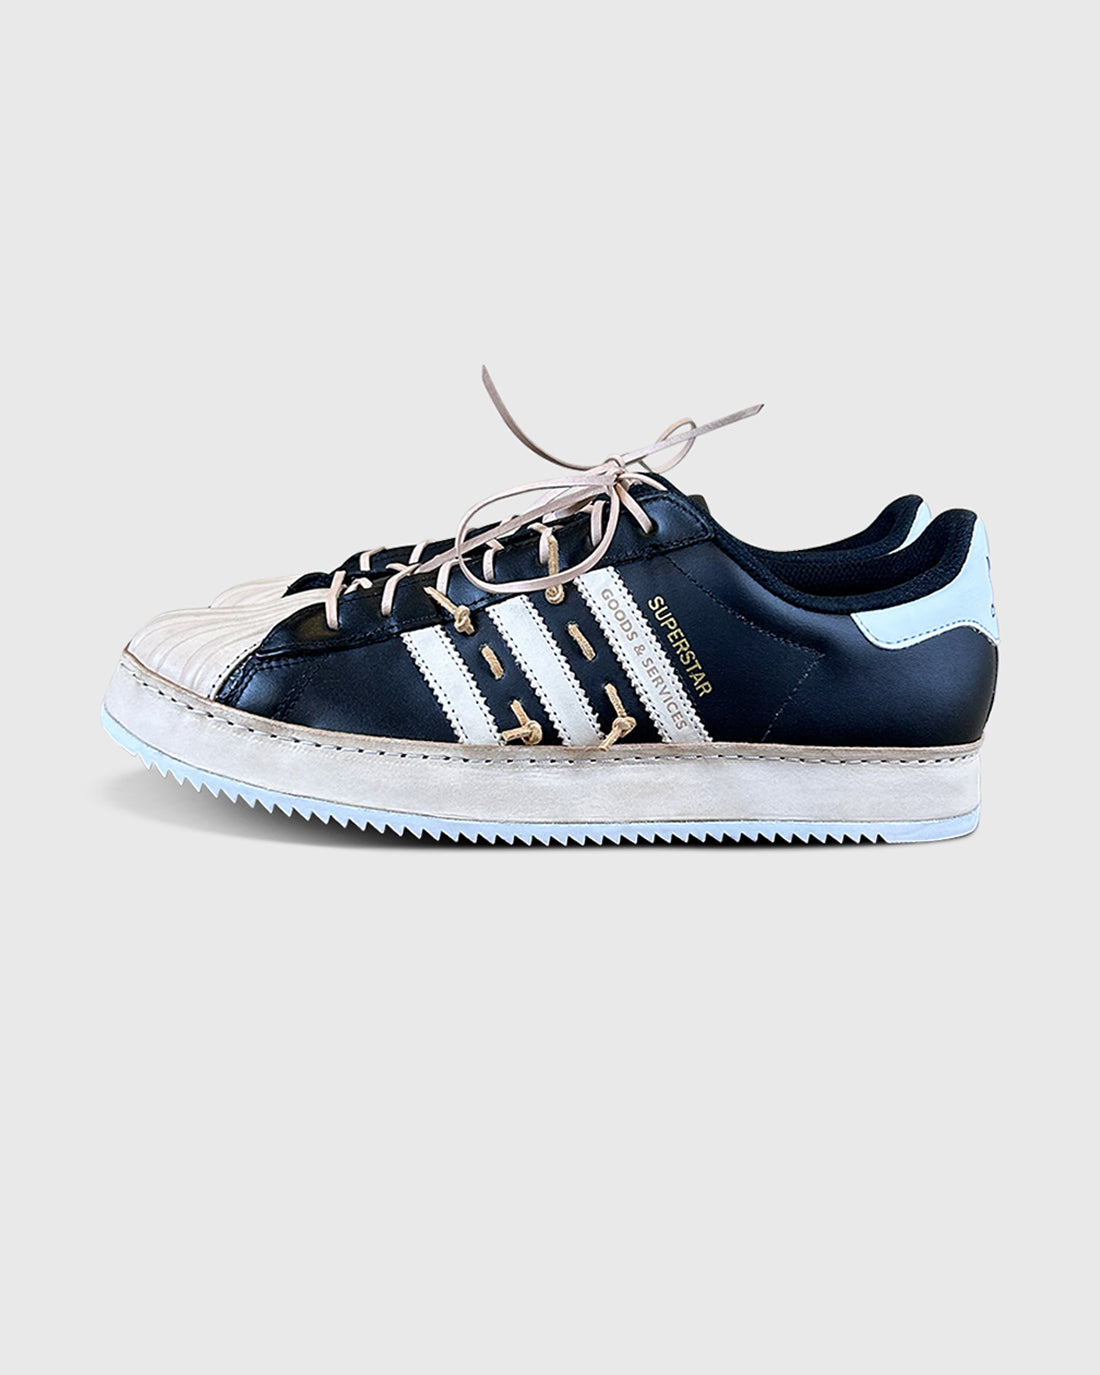 Adidas Superstar Leather Resole Goods & Services